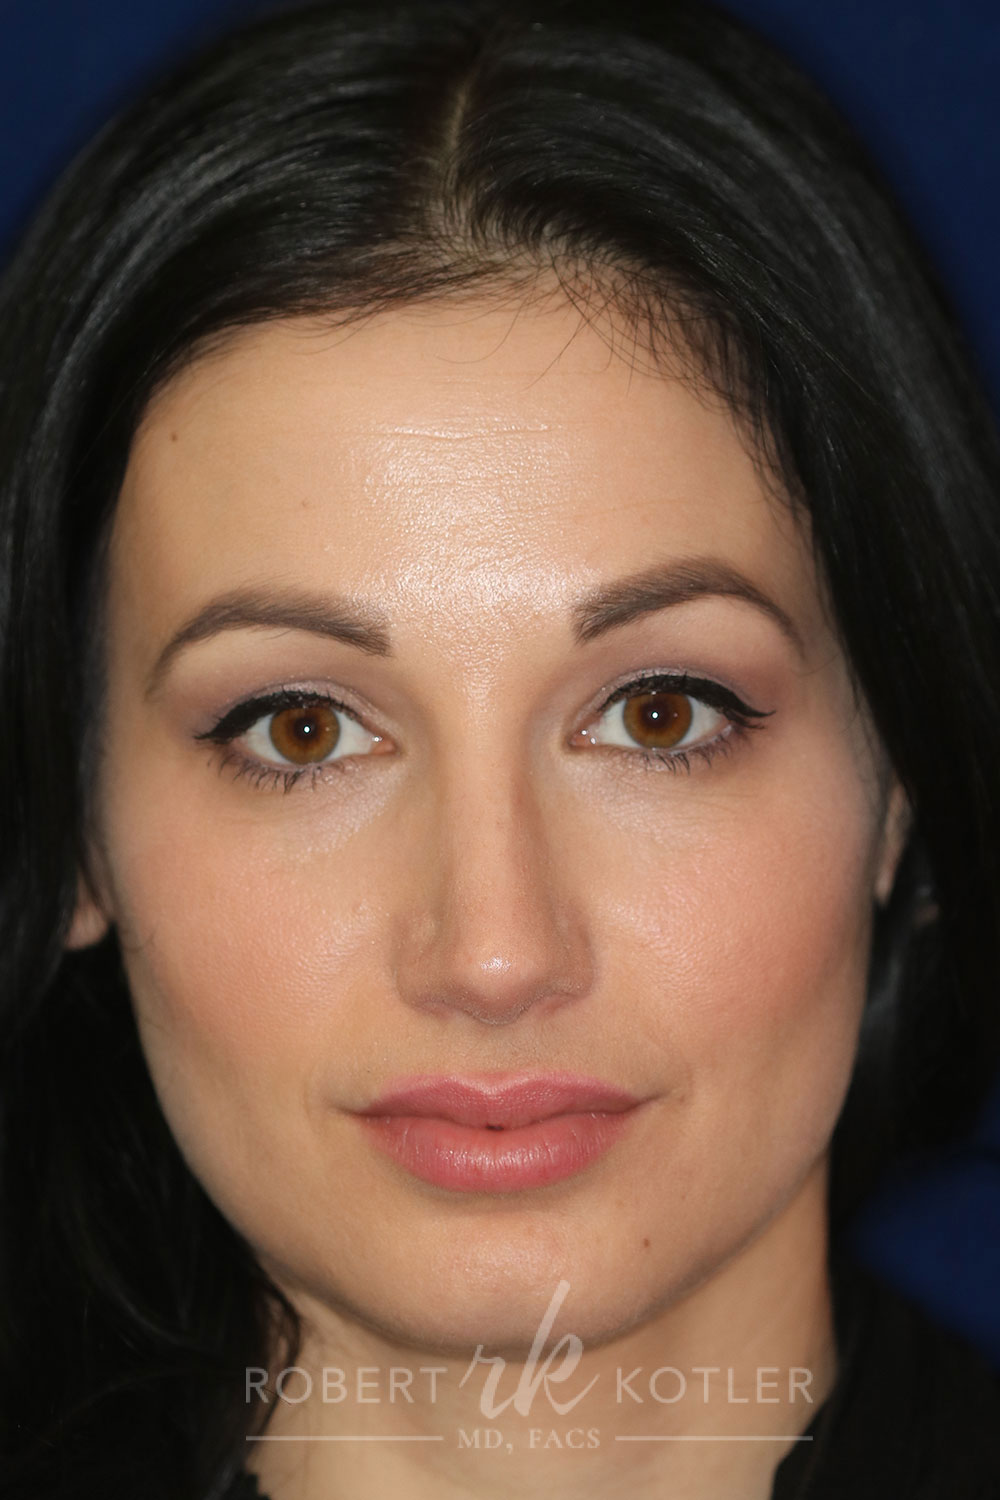 Rhinoplasty - Front Face View - After Pic - Hump removal - tip refined - Crooked nose corrected - Rhinoplasty Surgeon in Beverly Hills